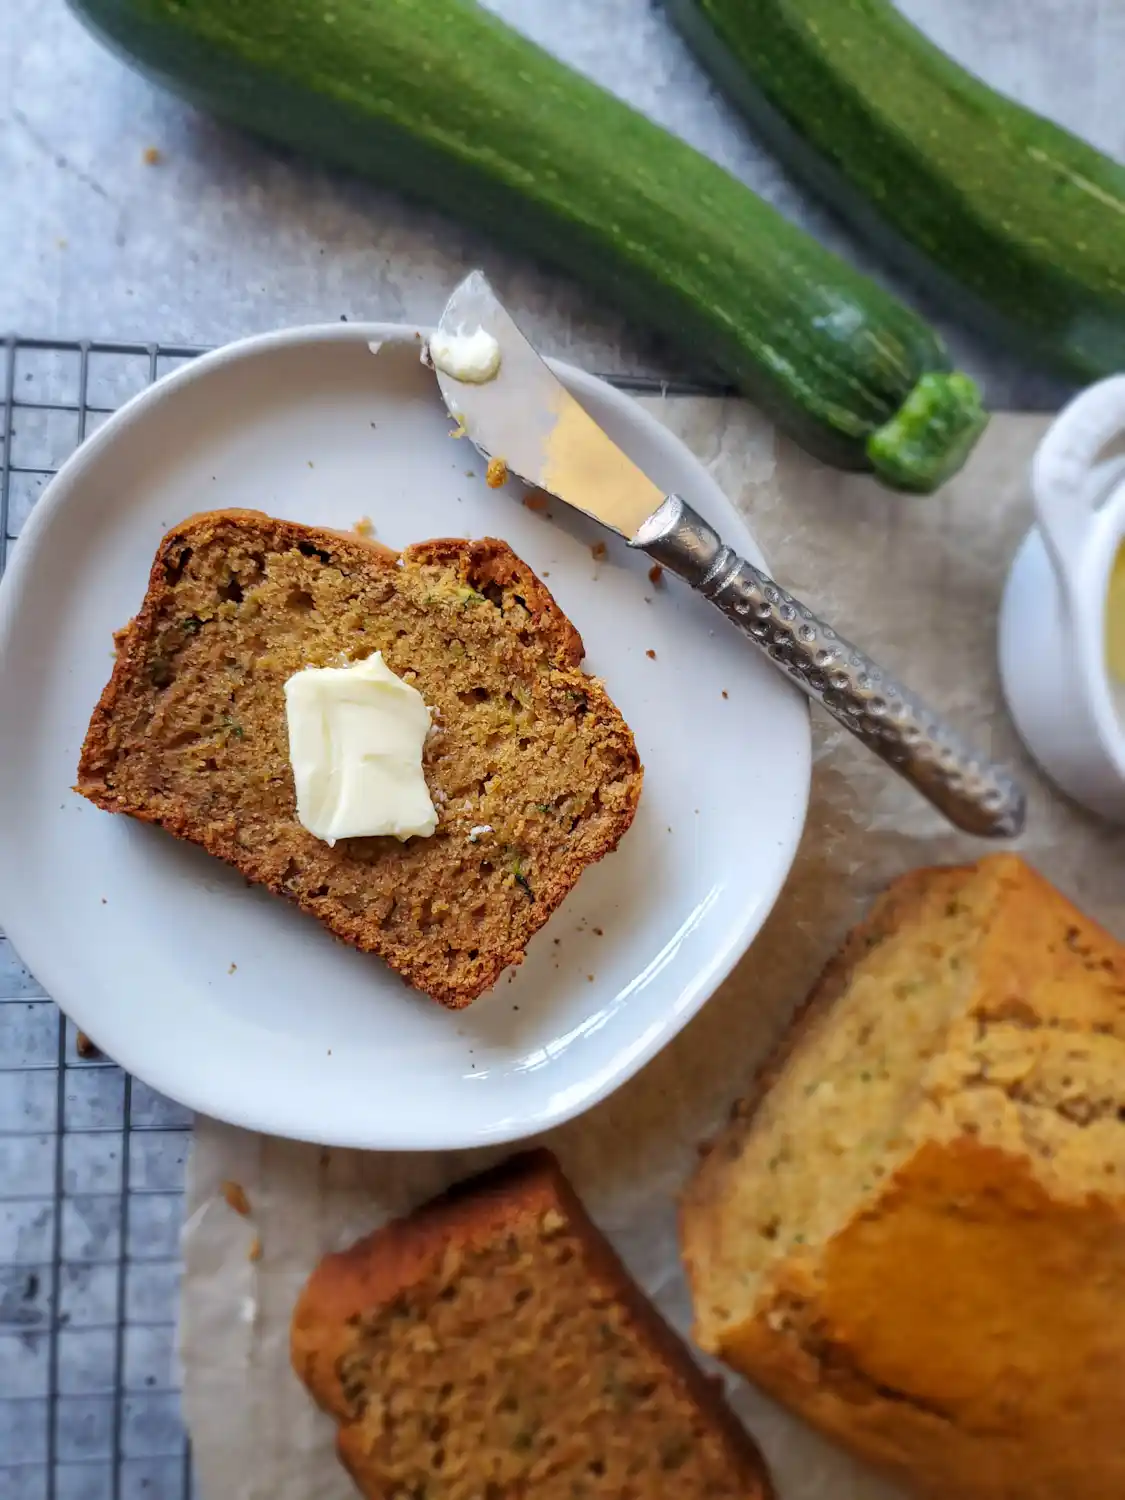 A slice of sourdough zucchini bread with a tab of butter sitting in the middle of the slice on a small ceramic plate,  a small butter knife is resting on the plate. Nearby is the rest of the loaf as well as some fresh summer squash. Using extra zucchini for sourdough discard recipes is a great way to use up a surplus harvest.